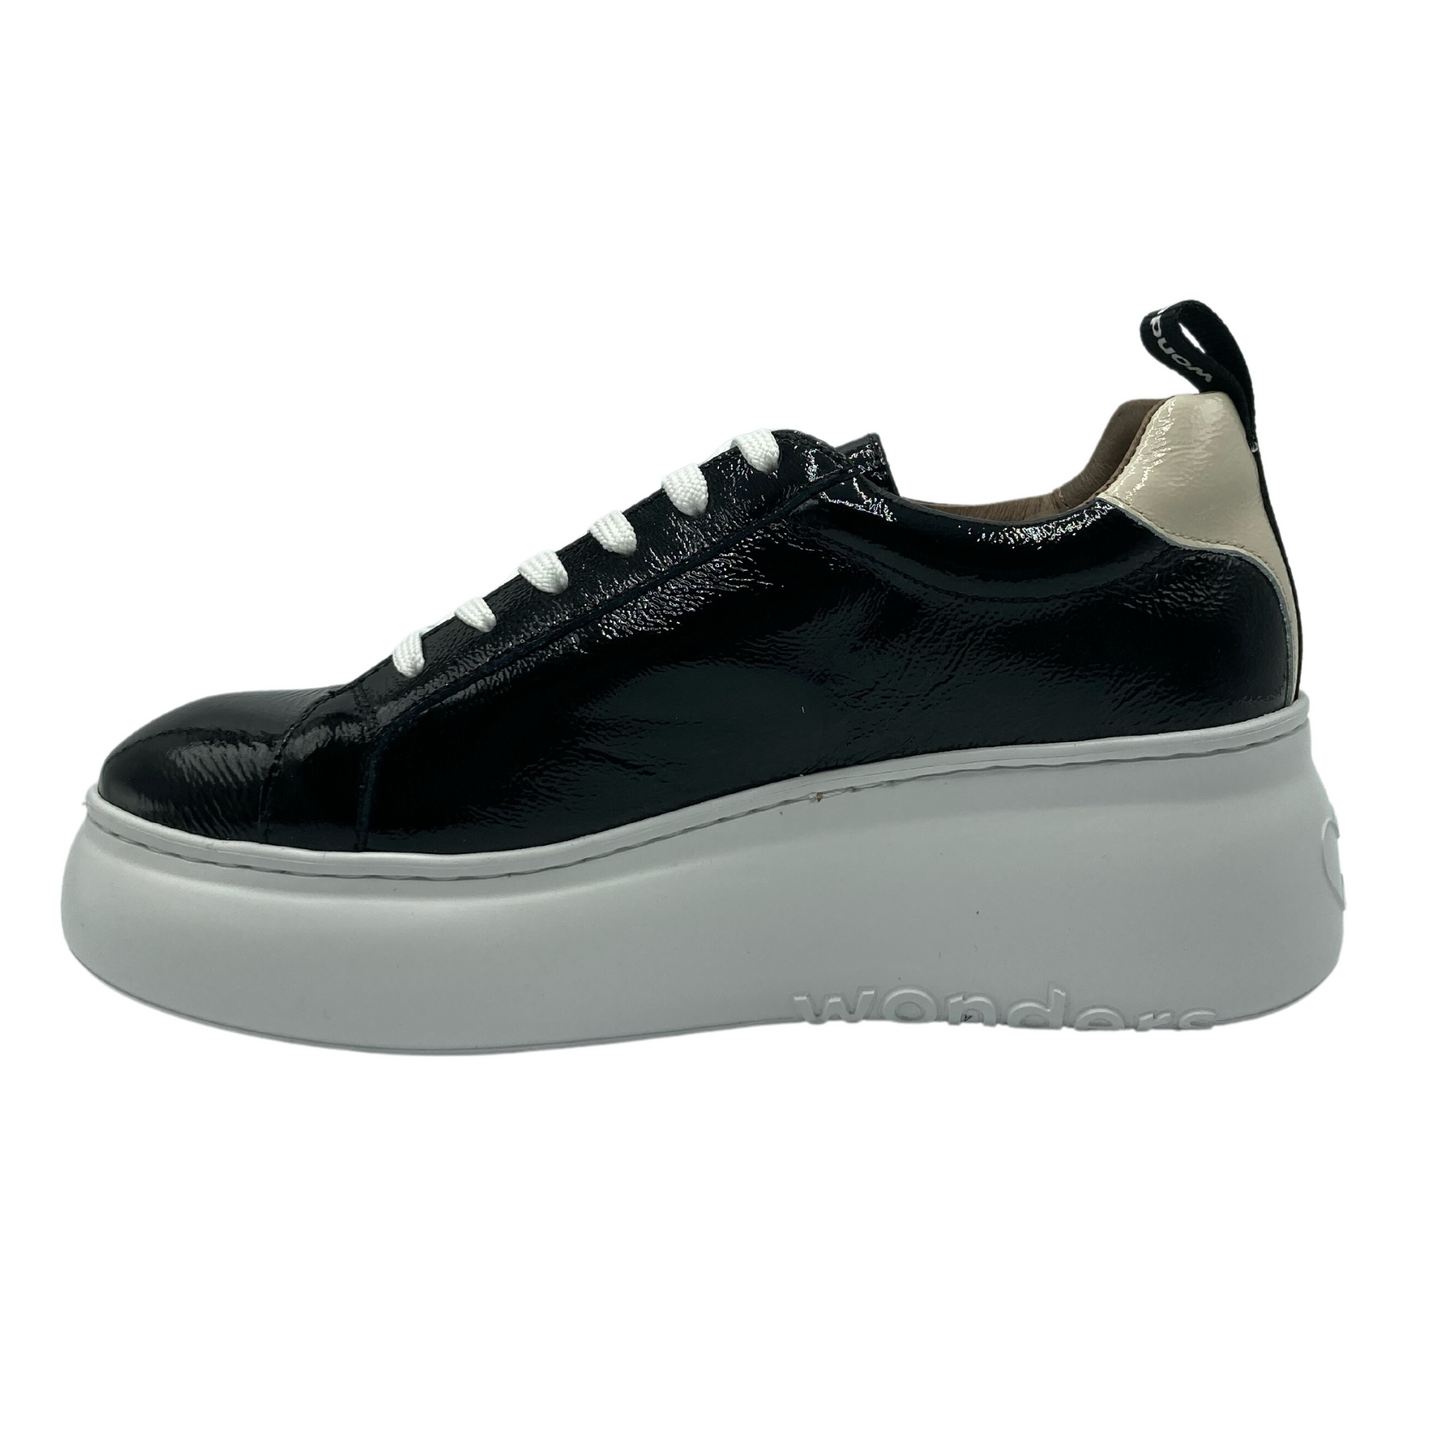 Pictured is a black patent leather sneaker on a white platform sole in left profile. The sneaker has white lace up detail and a cream patent detail on the heel.